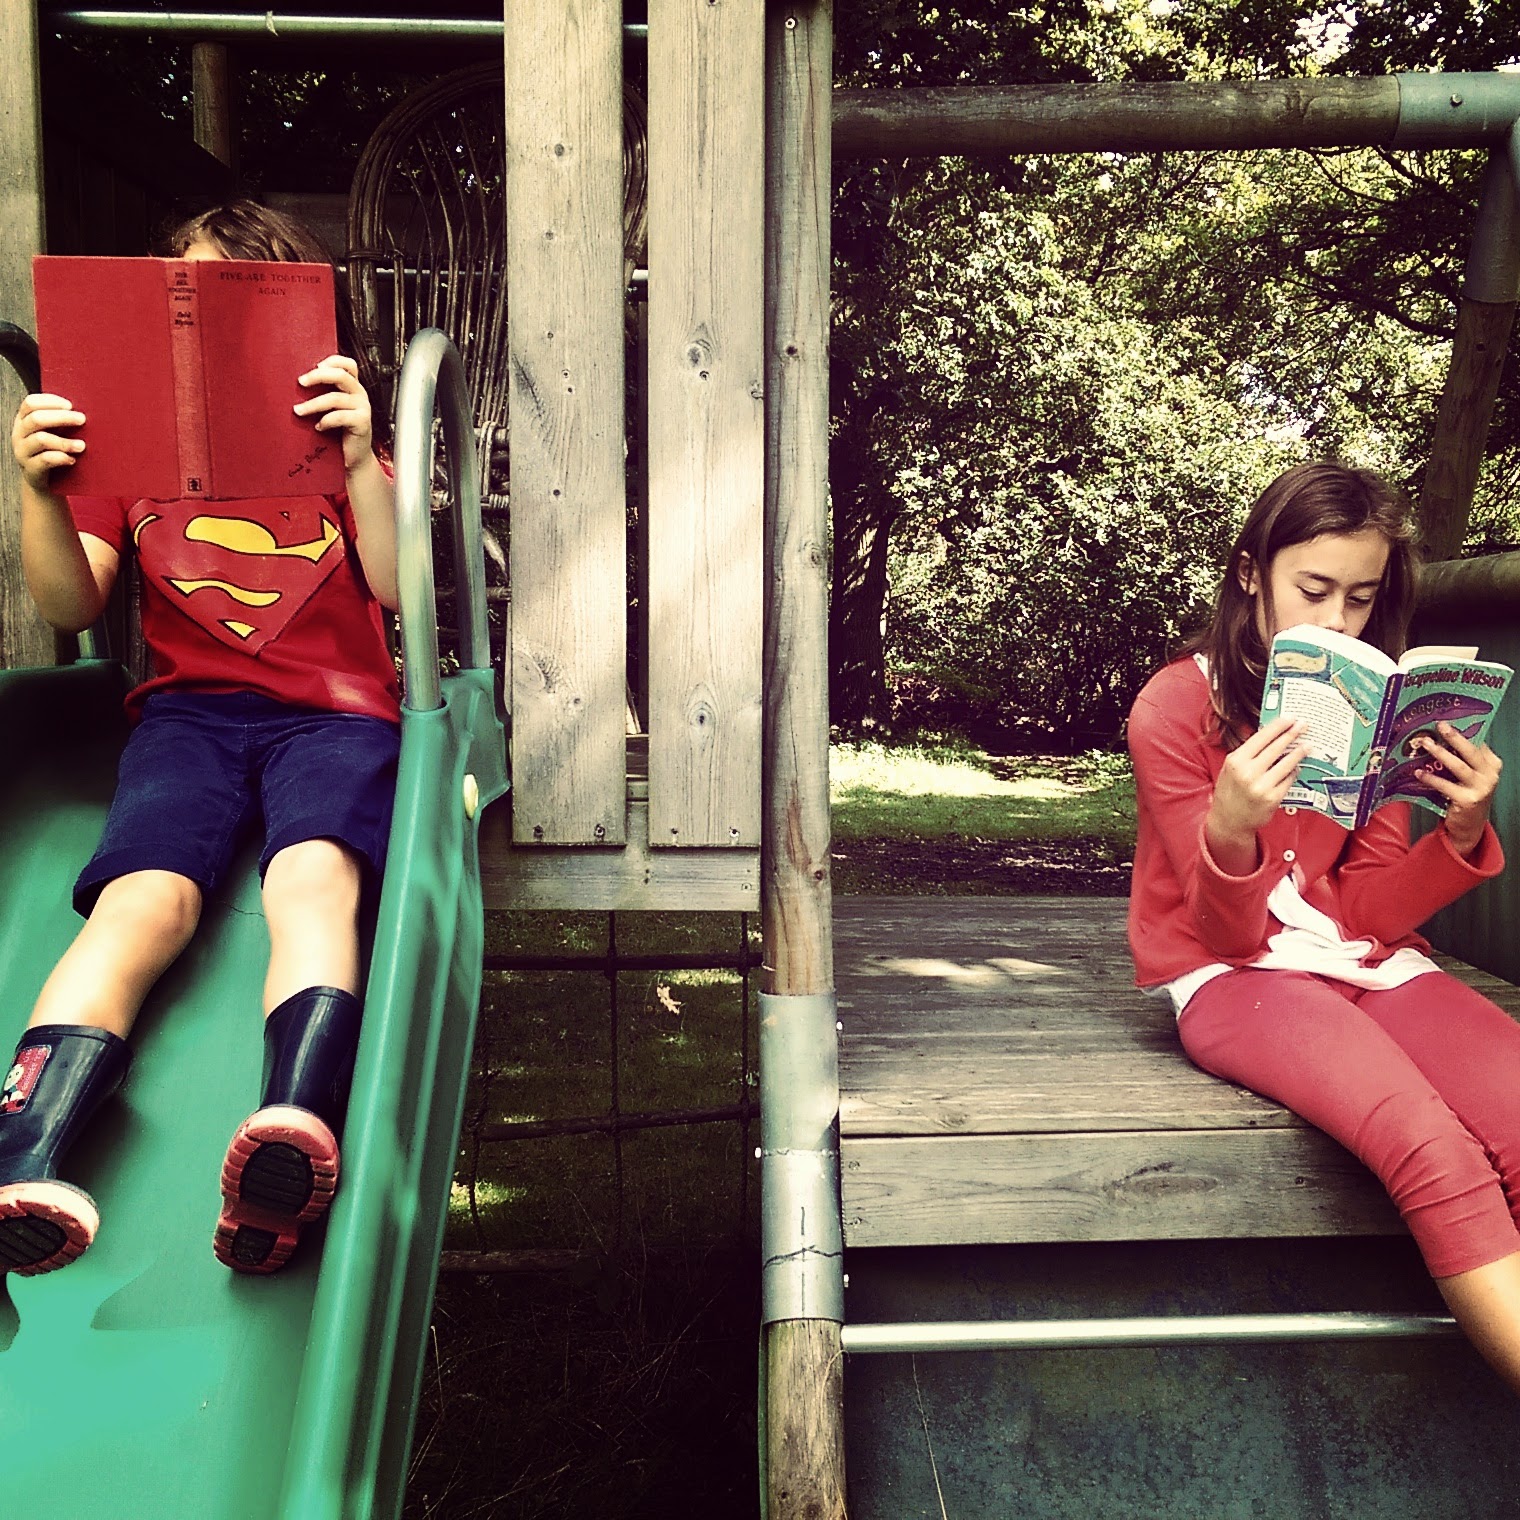 Two girls reading books on play equipment